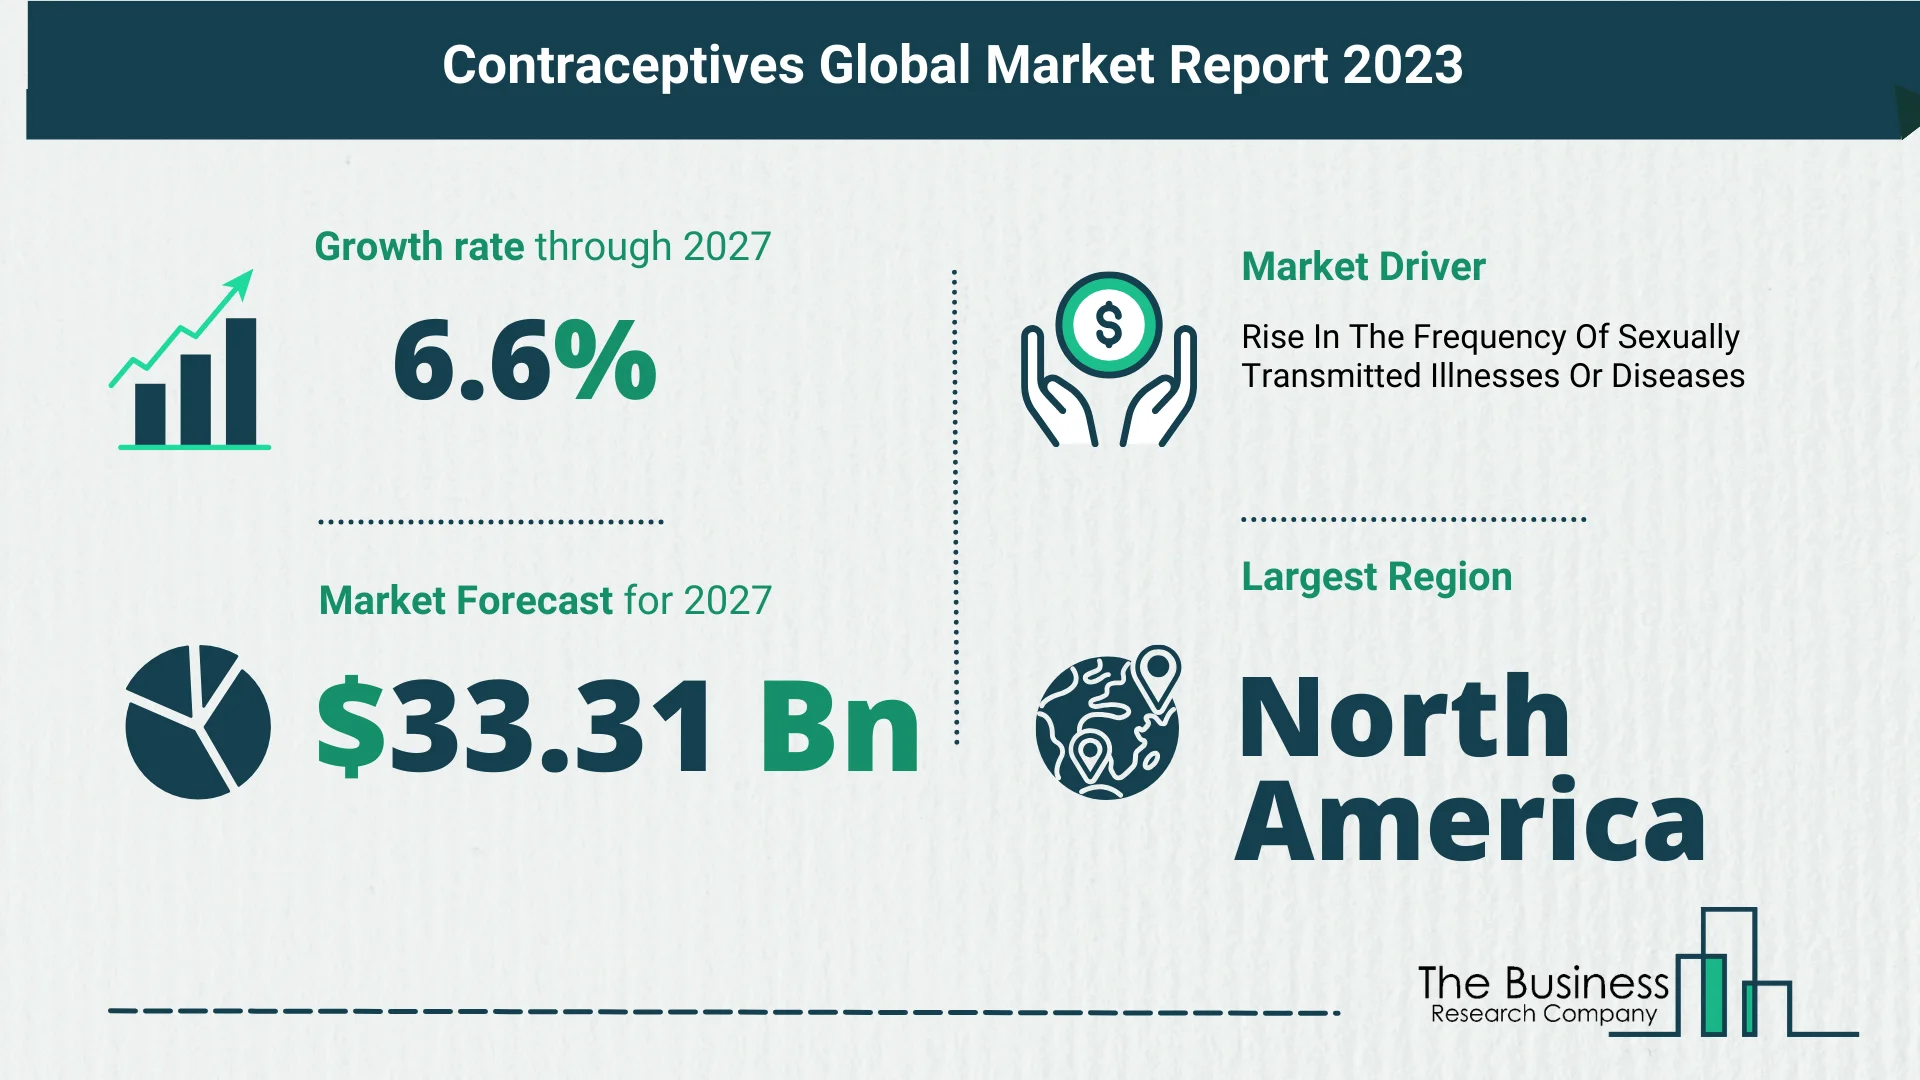 5 Key Insights On The Contraceptives Market 2023